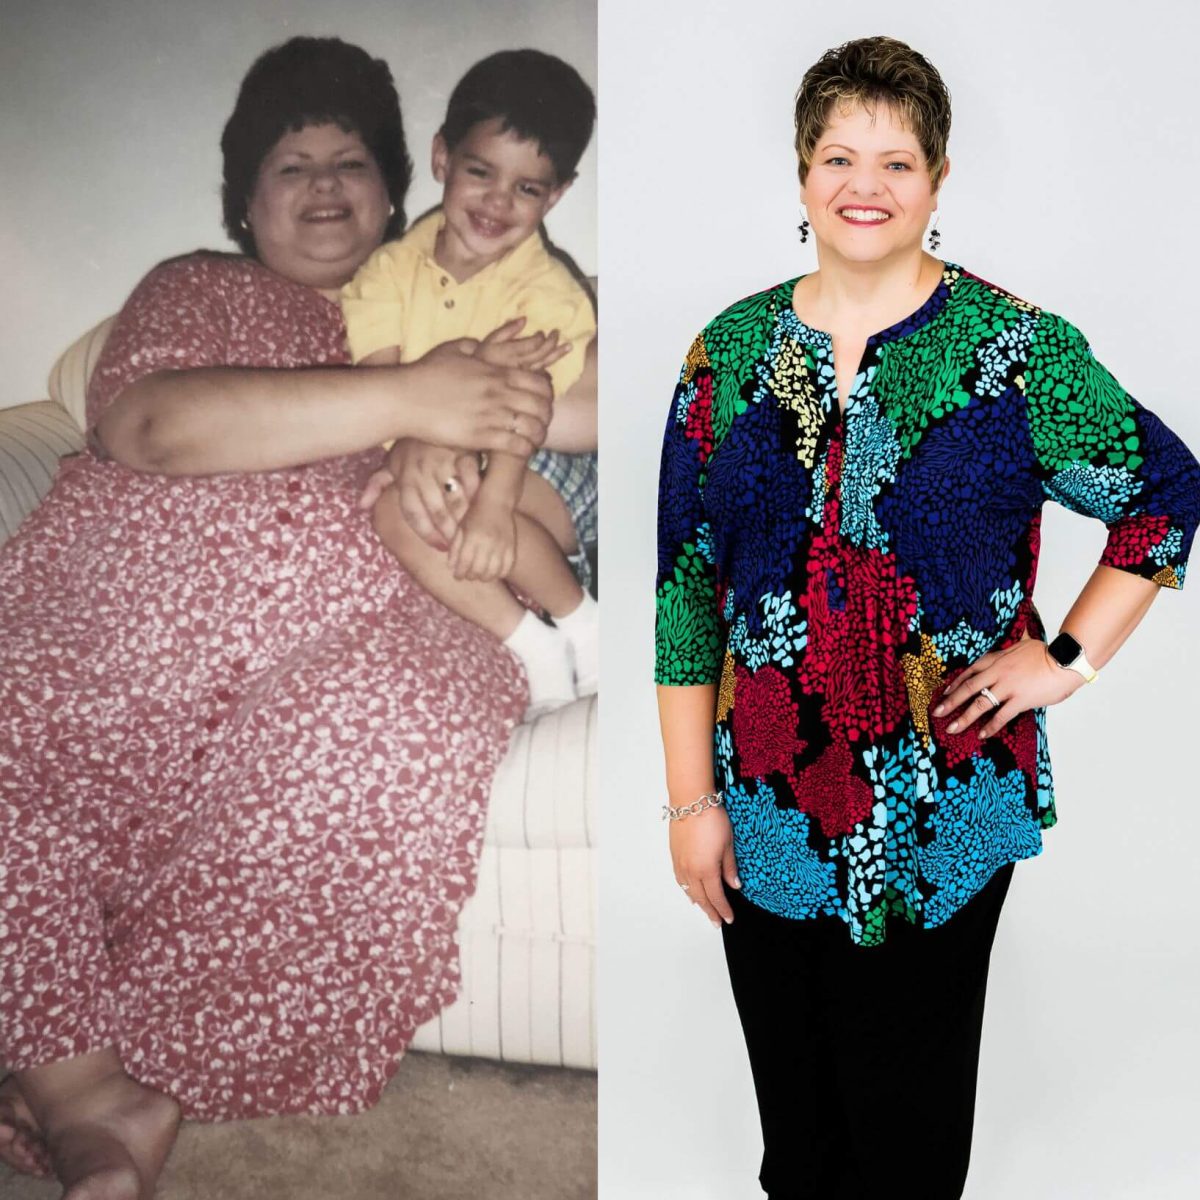 Two photos of a woman and a child before and after weight loss